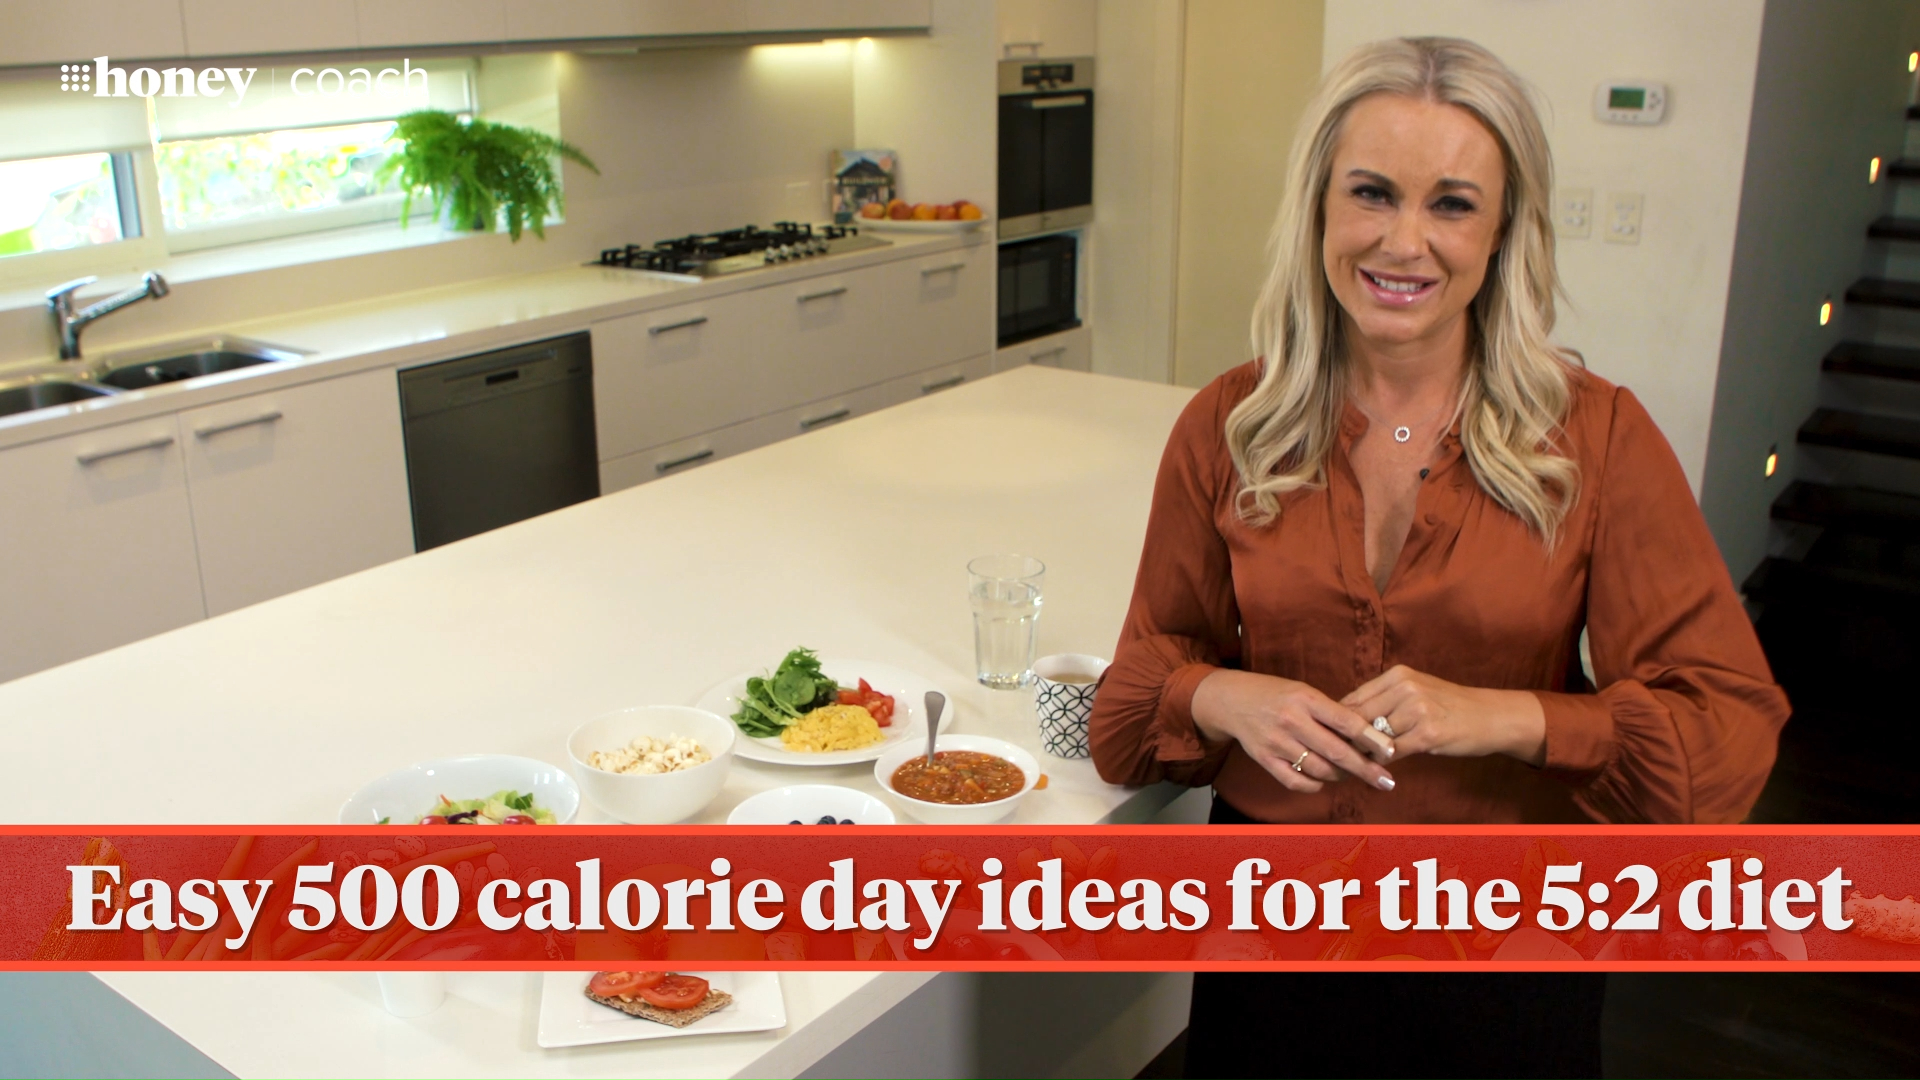 Easy 500 calorie ideas for the 5:2 diet